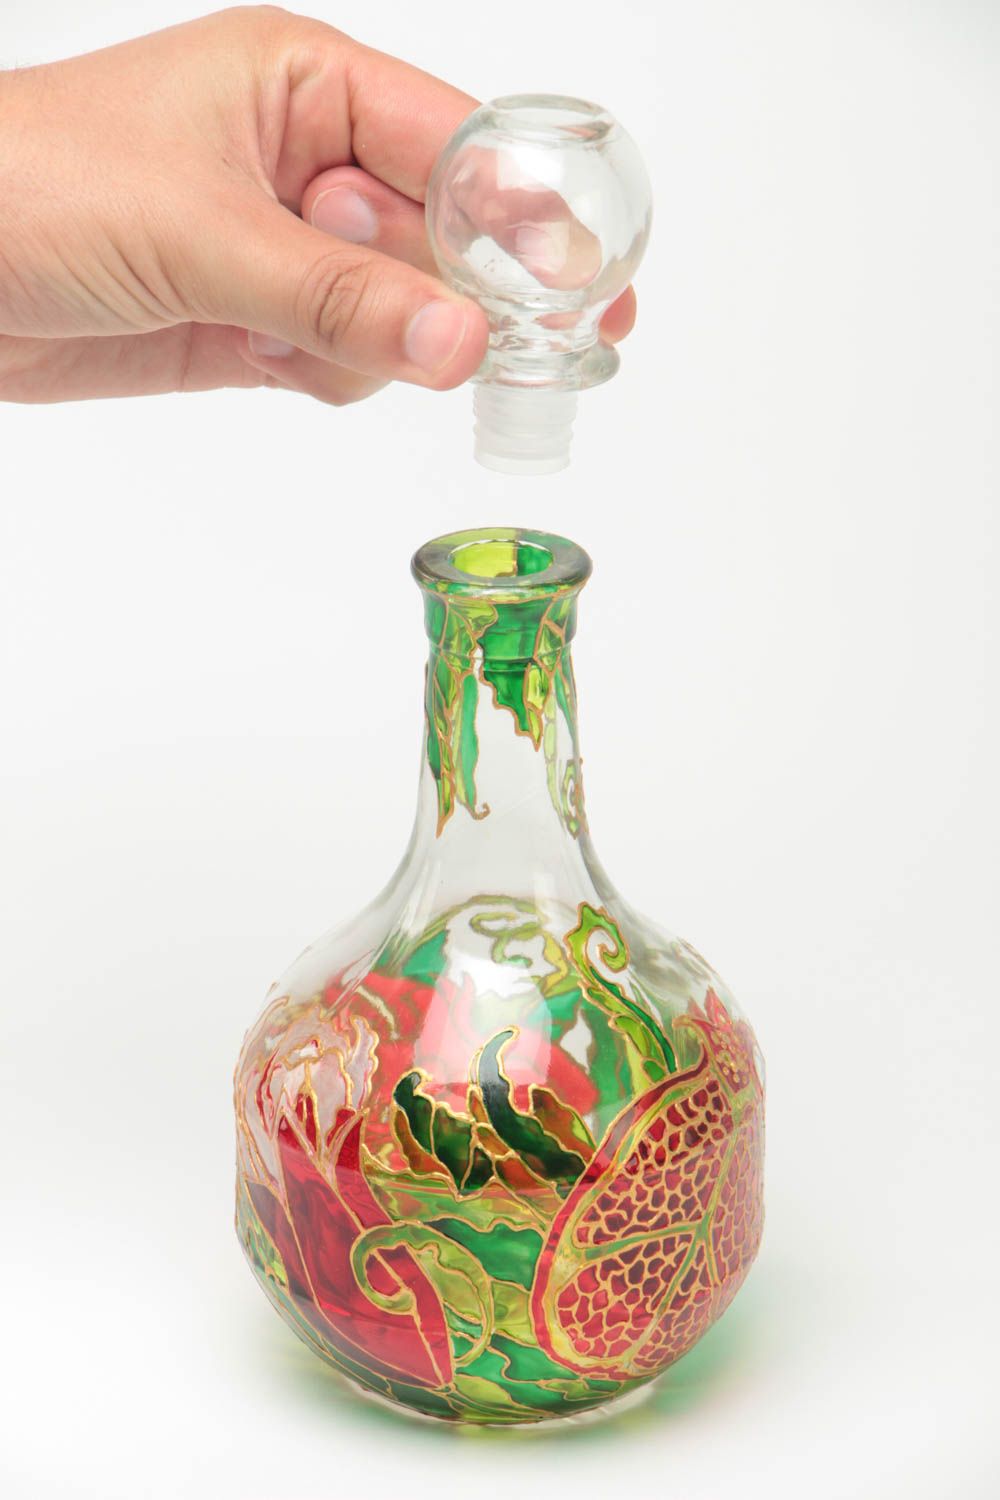 15 oz clear glass wine carafe with hand-painted floral pattern 1 lb photo 5